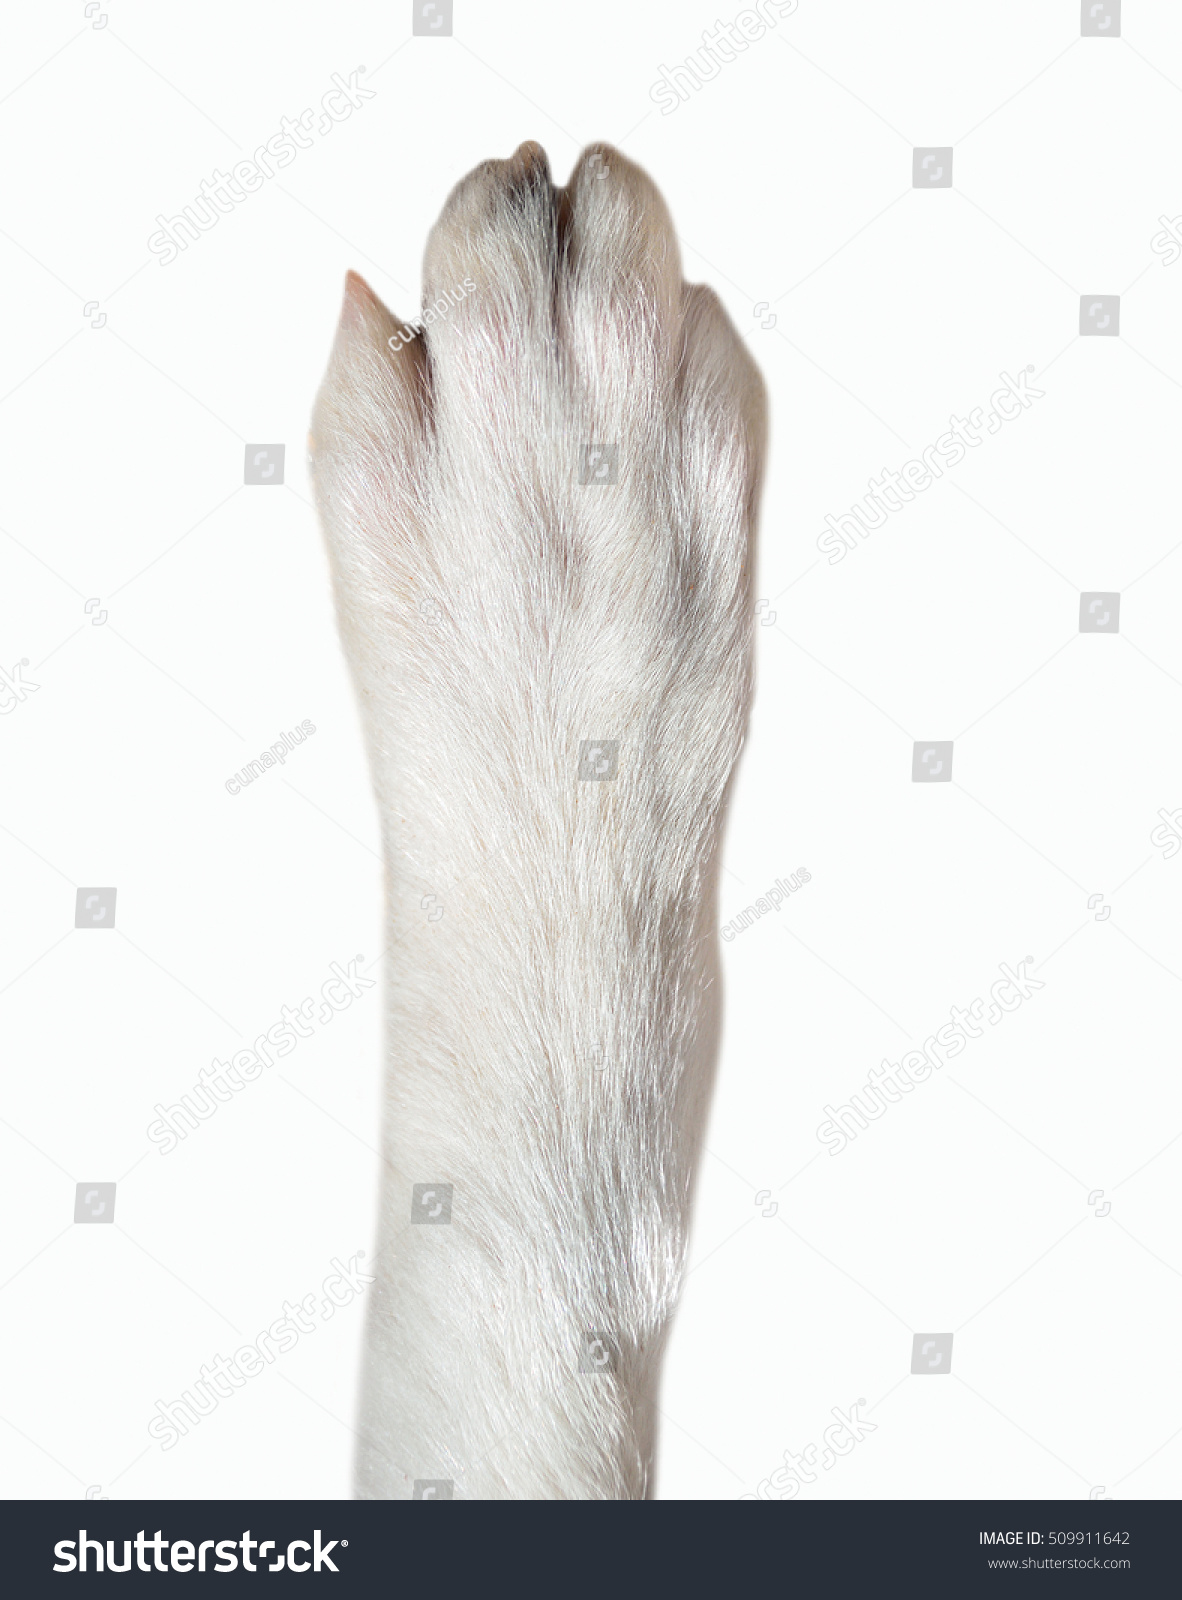 Close-up of dog paw isolated on white background. Dog breed is Border Collie #509911642